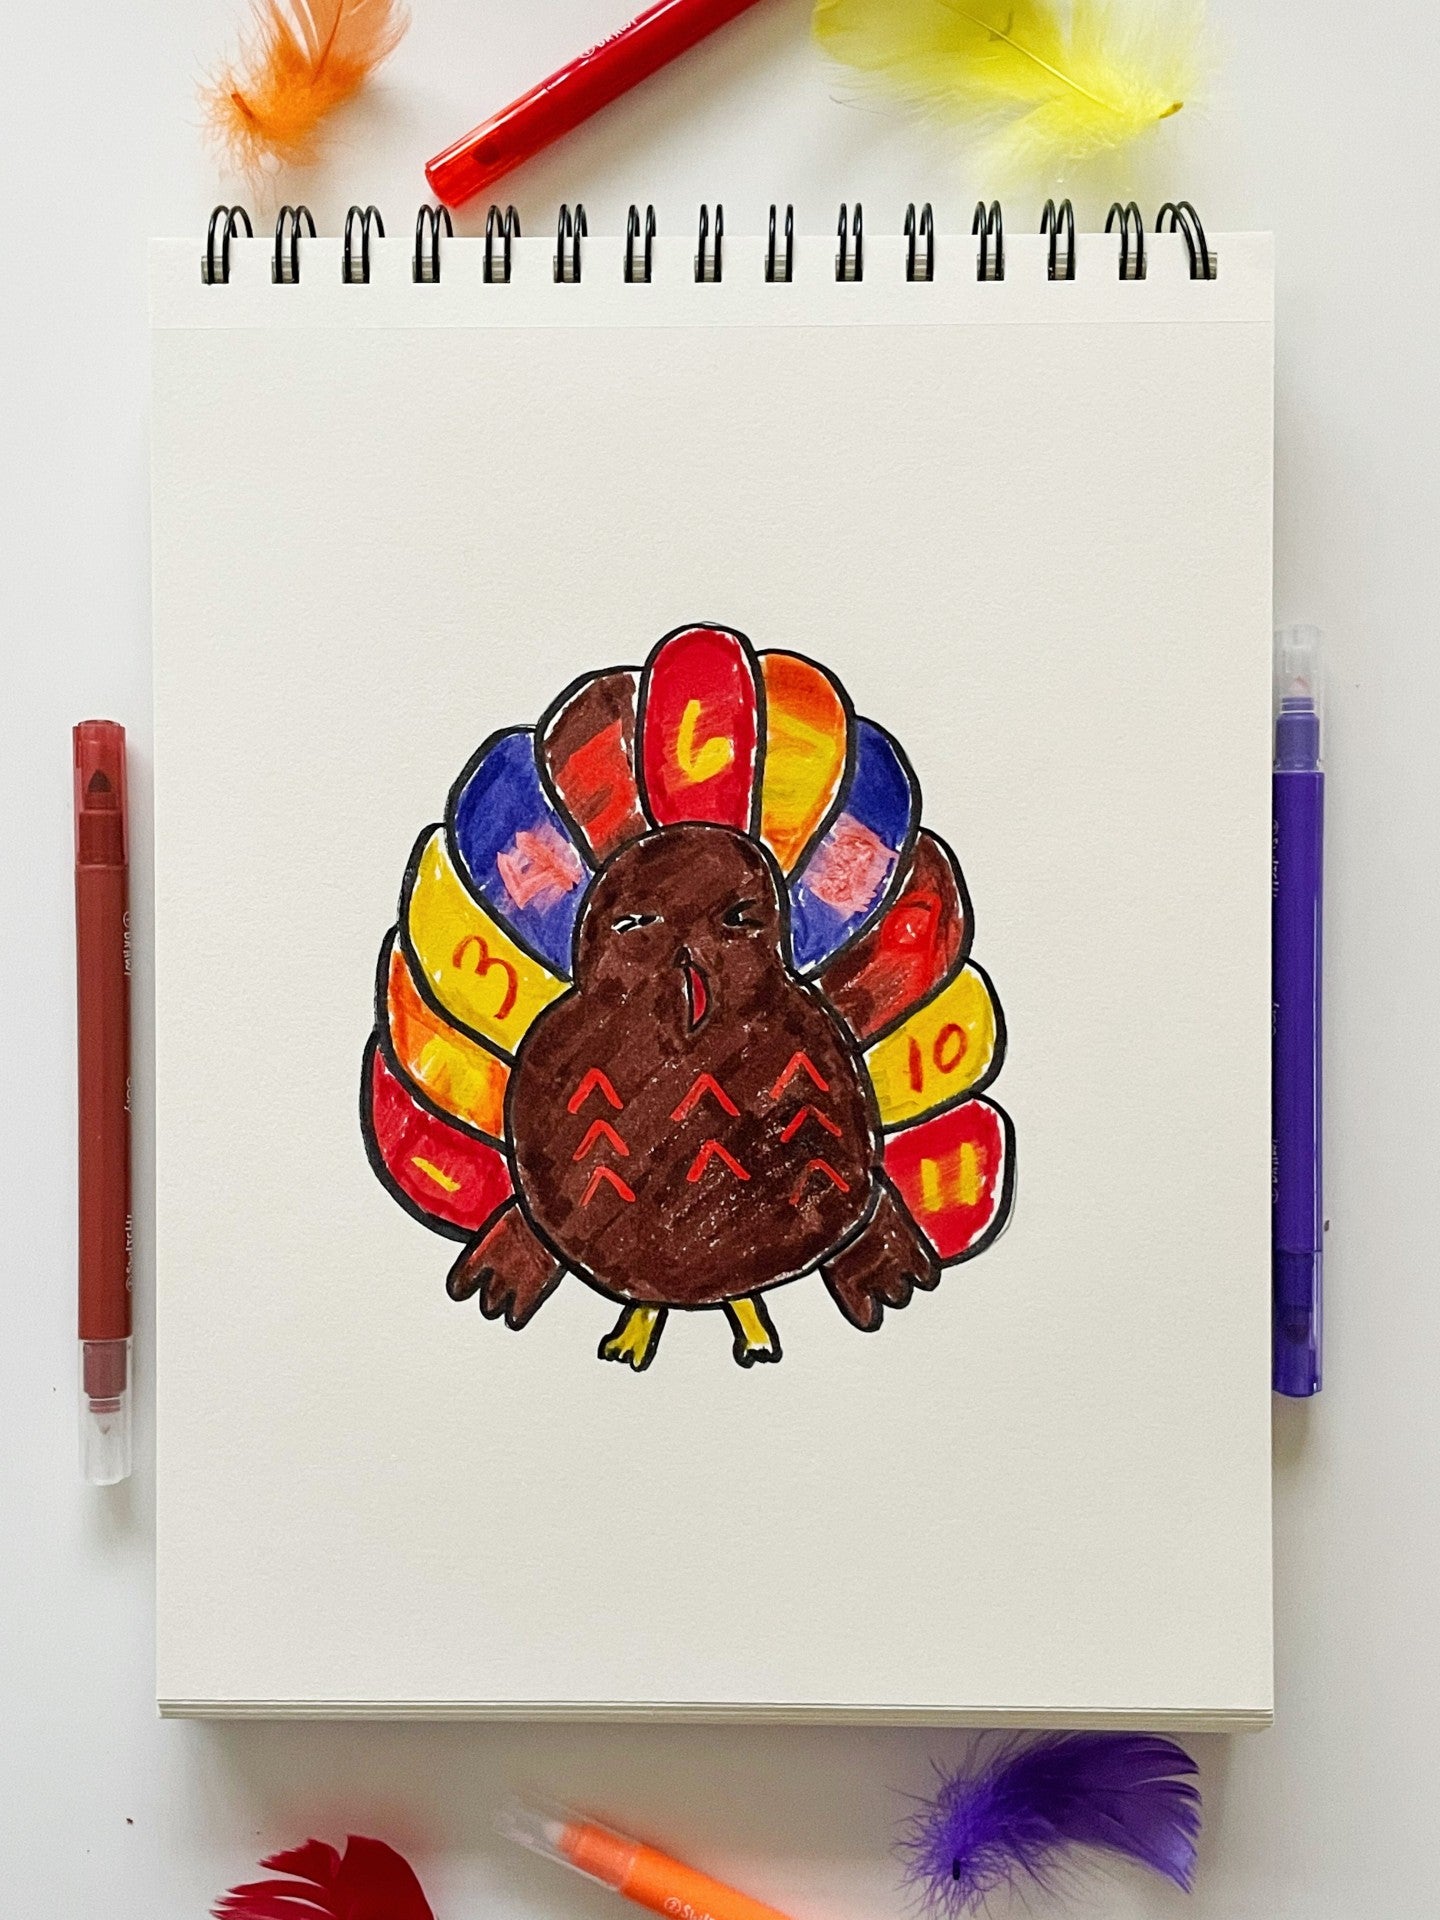 Sketchbook with colored in turkey, markers, and colored feathers on table